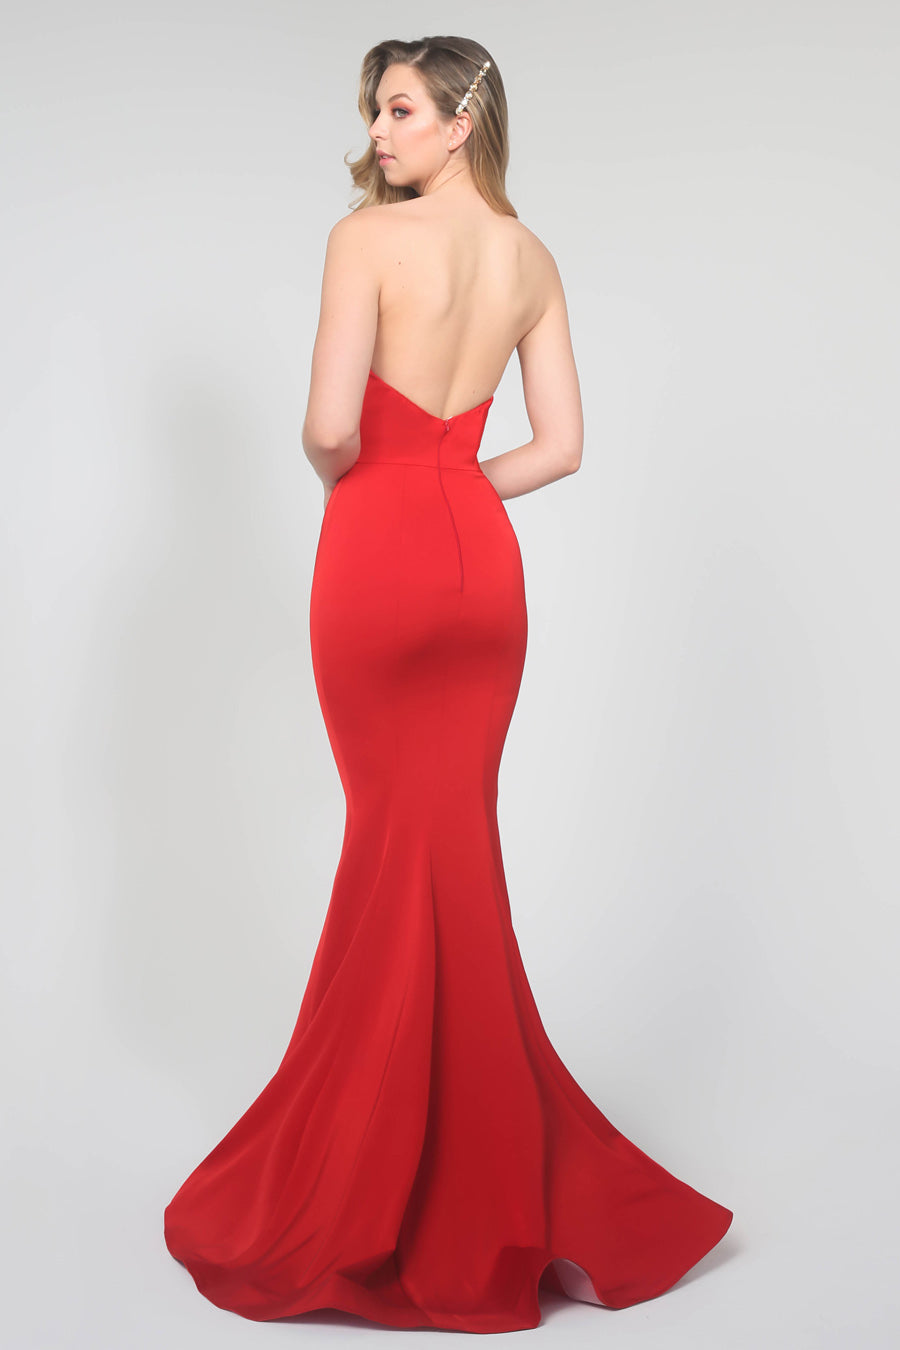 Tina Holly Couture Designer BA651 Red Satin Strapless Mermaid Formal Dress Tina Holly Couture$ AfterPay Humm ZipPay LayBuy Sezzle